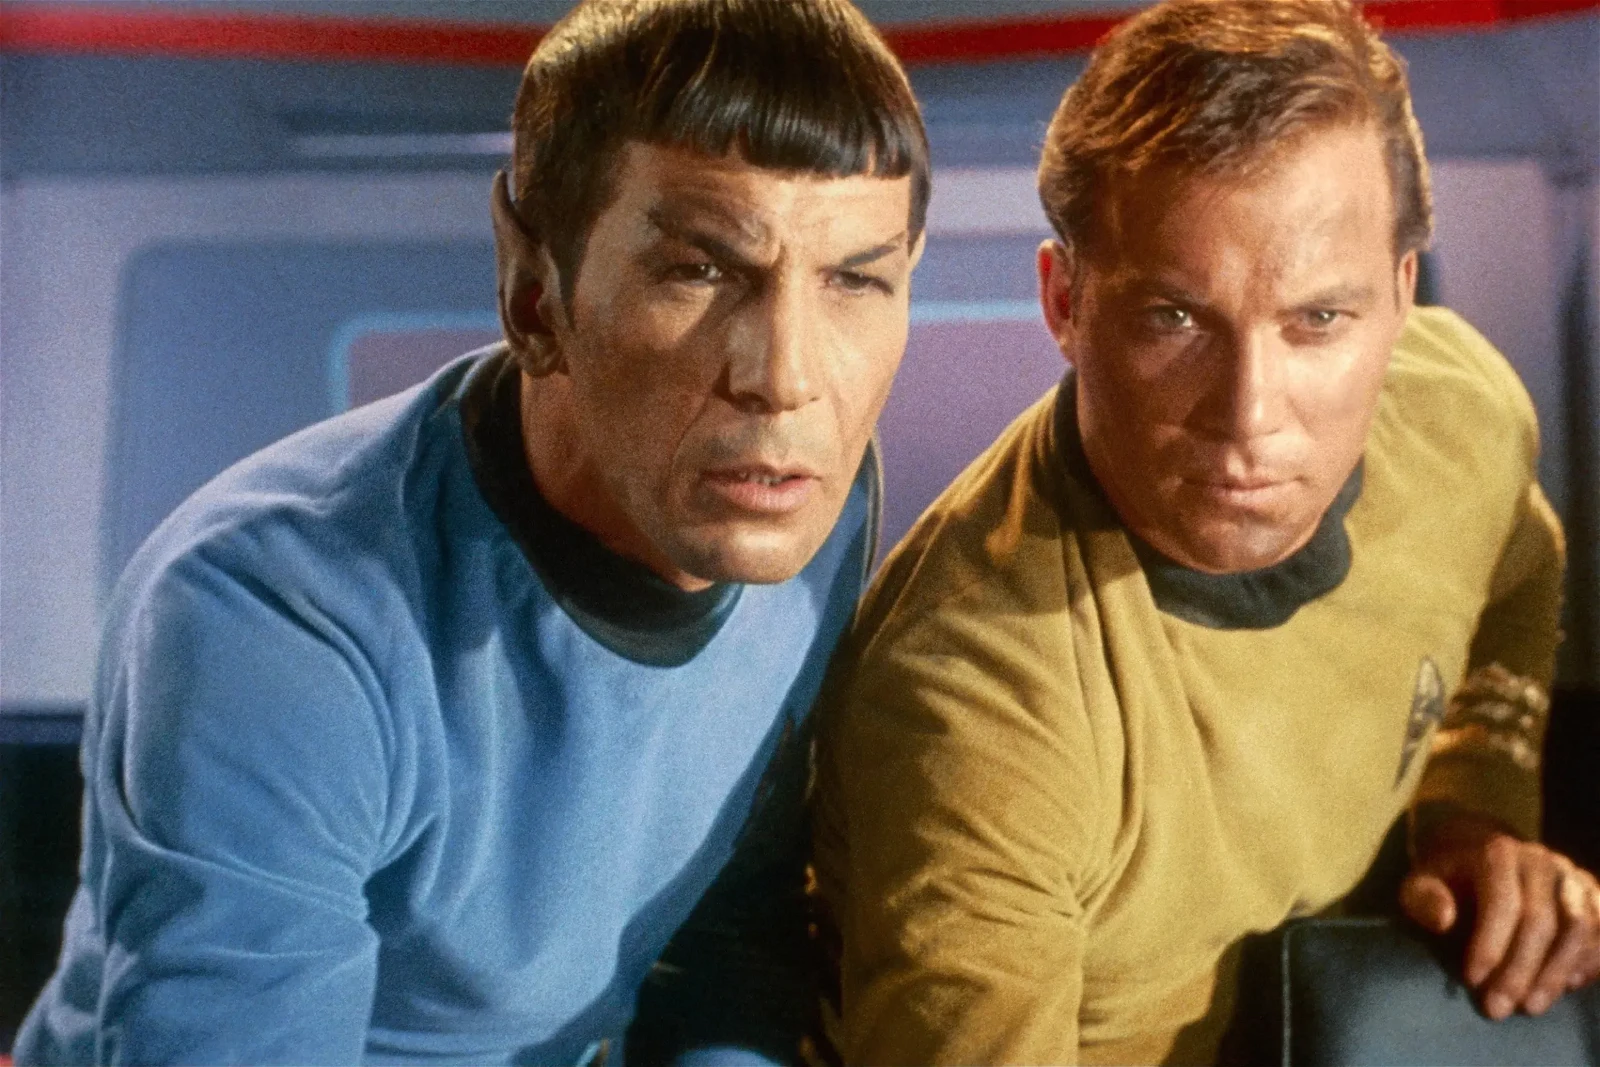 Leonard Nimoy and William Shatner as Spock and Captain Kirk in a still from Star Trek